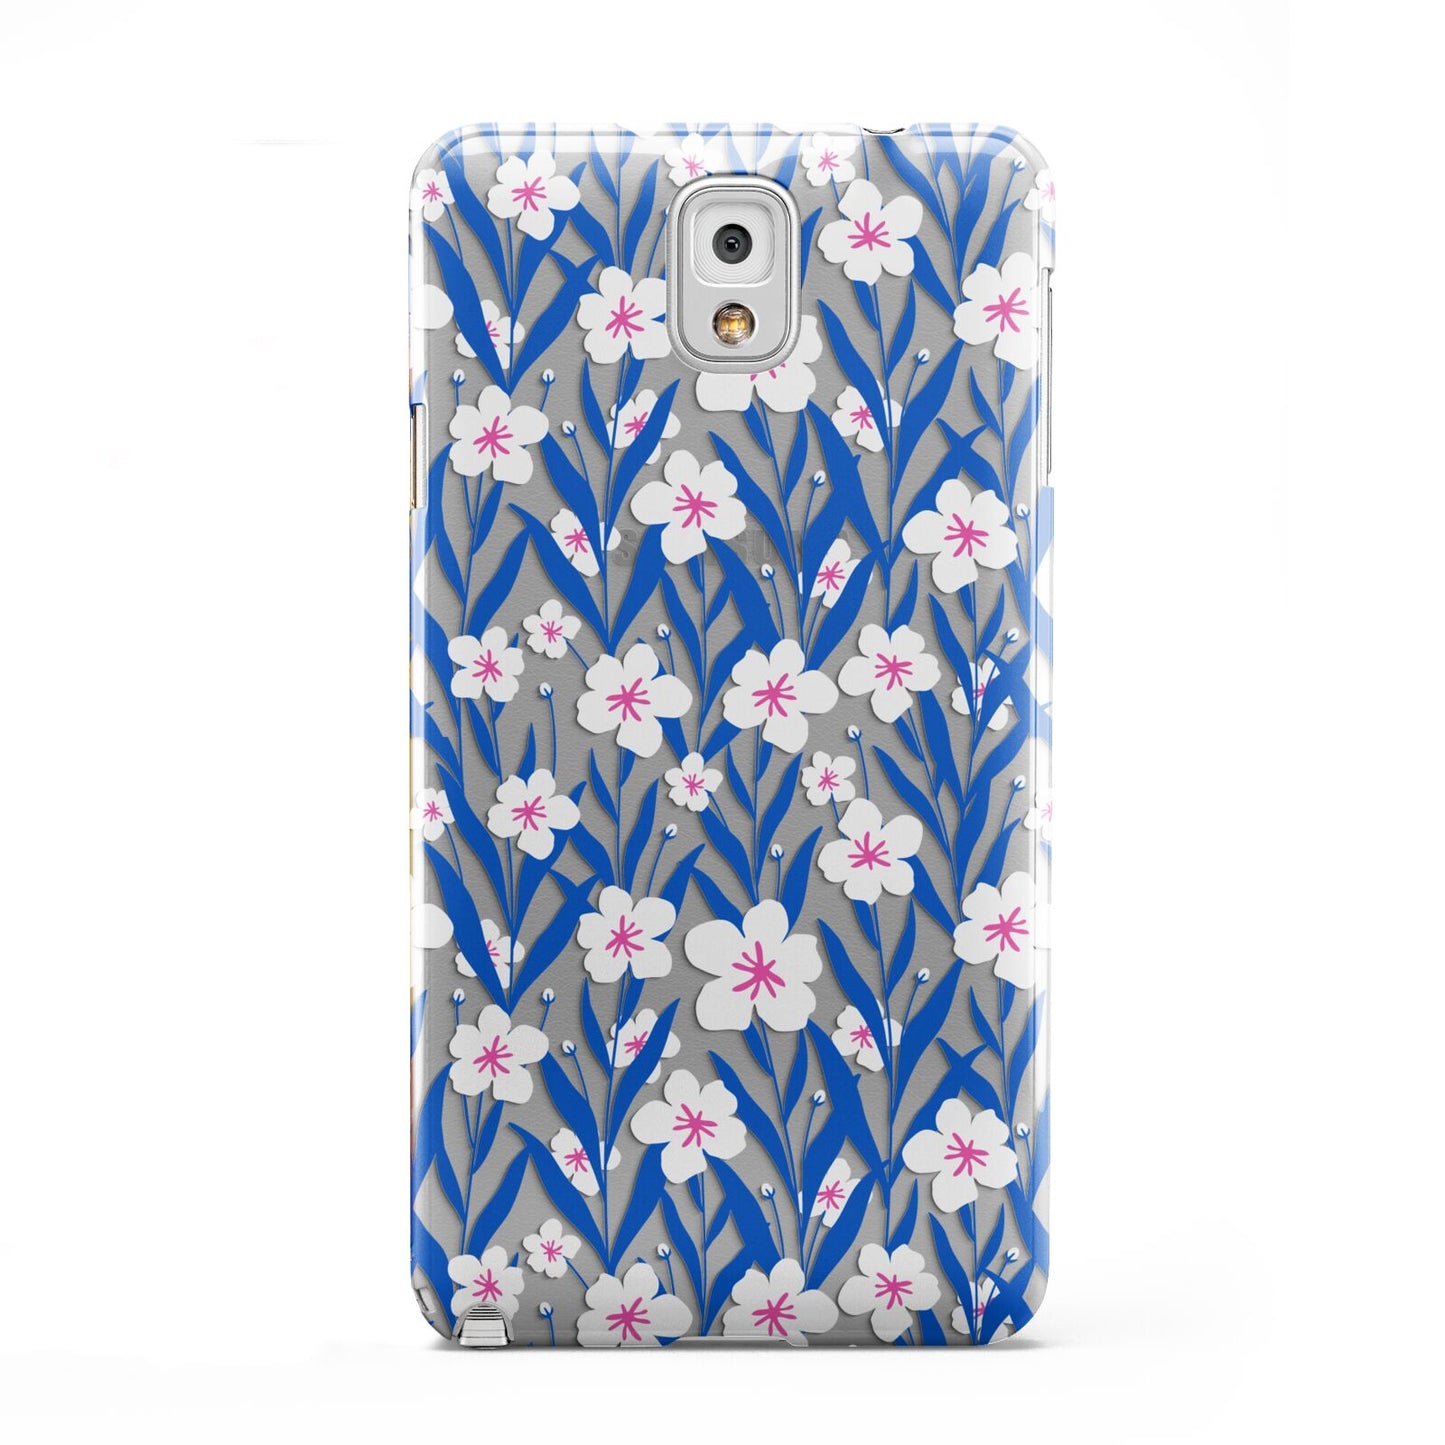 Blue and White Flowers Samsung Galaxy Note 3 Case